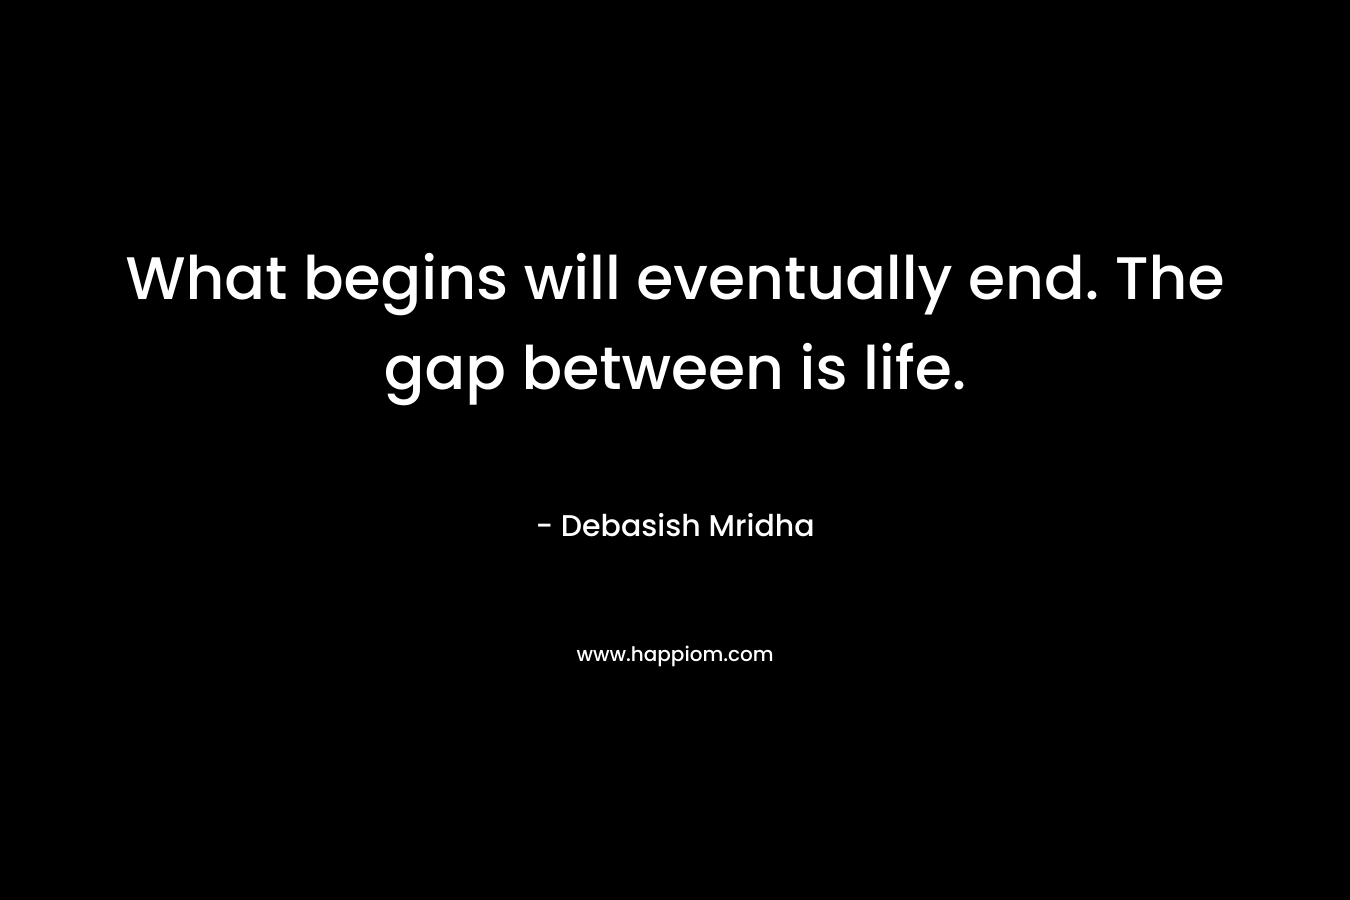 What begins will eventually end. The gap between is life.